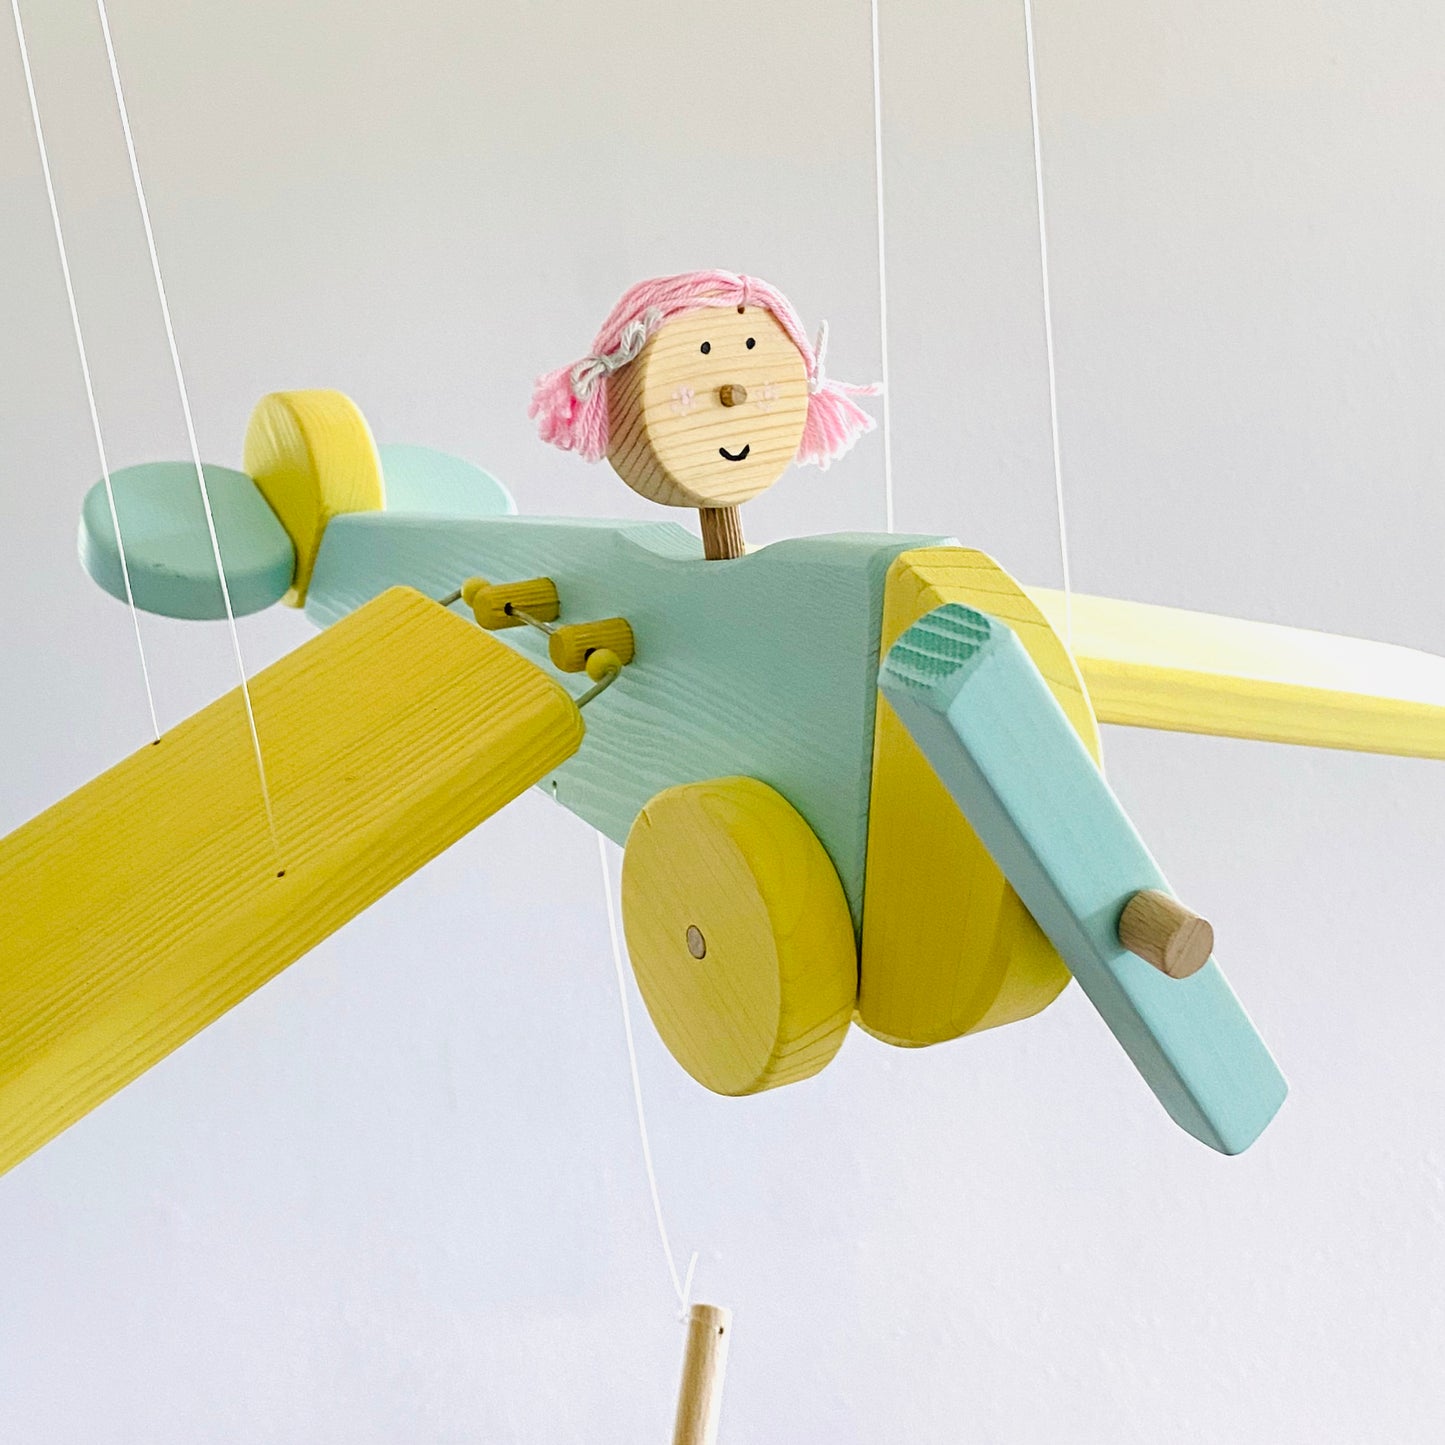 Wooden Airplane Nursery Mobile - Yellow and Turquoise Plane